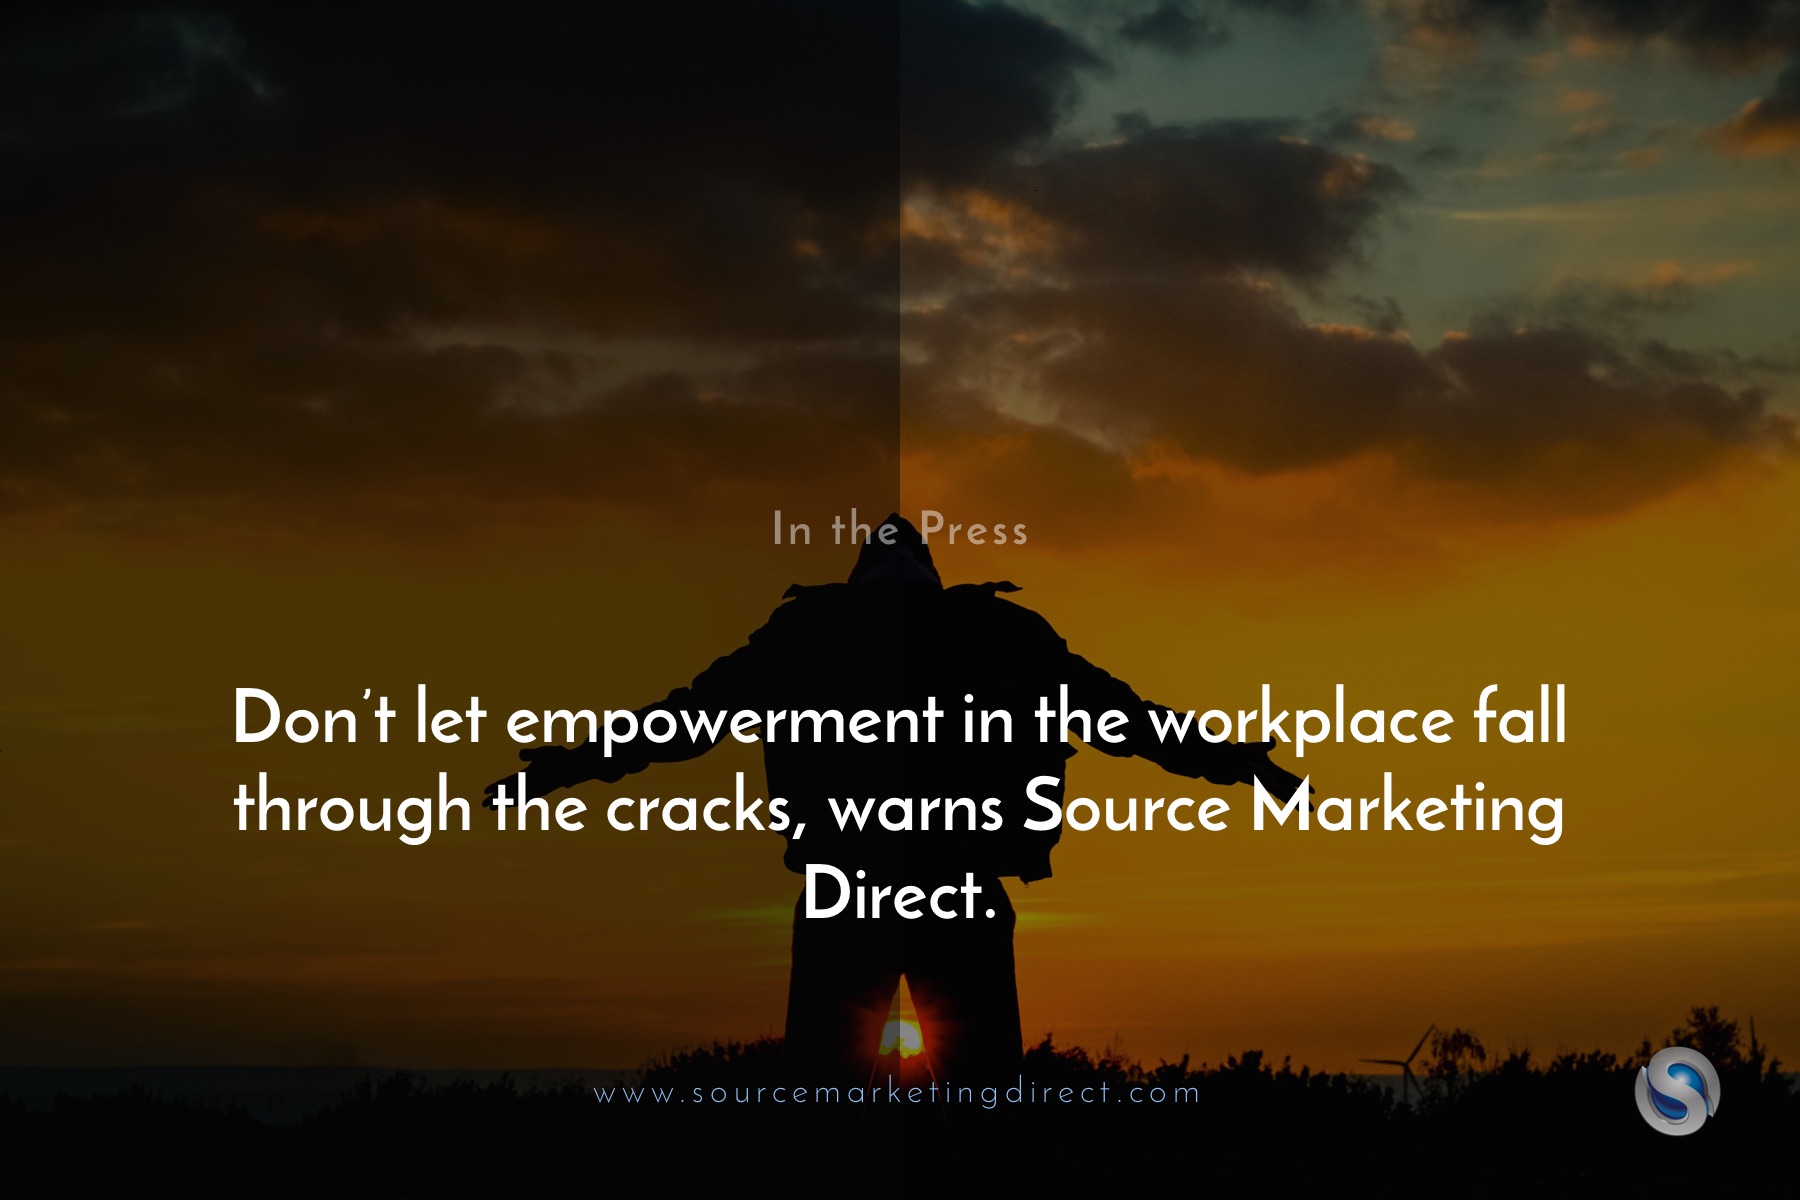 Don’t let empowerment in the workplace fall through the cracks, warns Source Marketing Direct